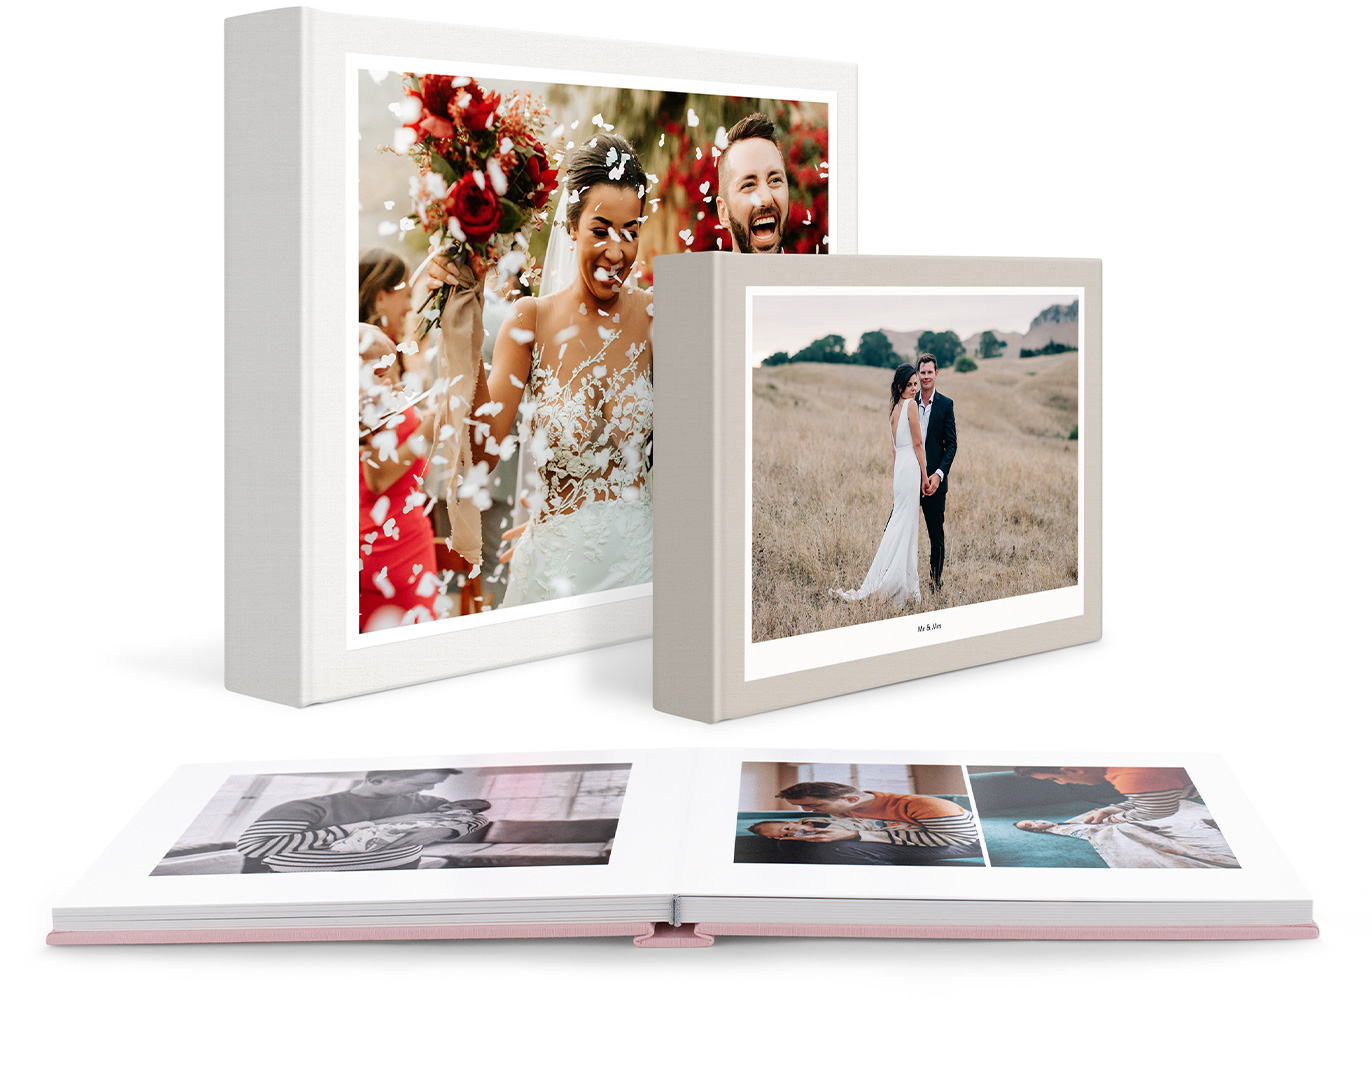 Three Classic Photo Albums with wedding and family images.